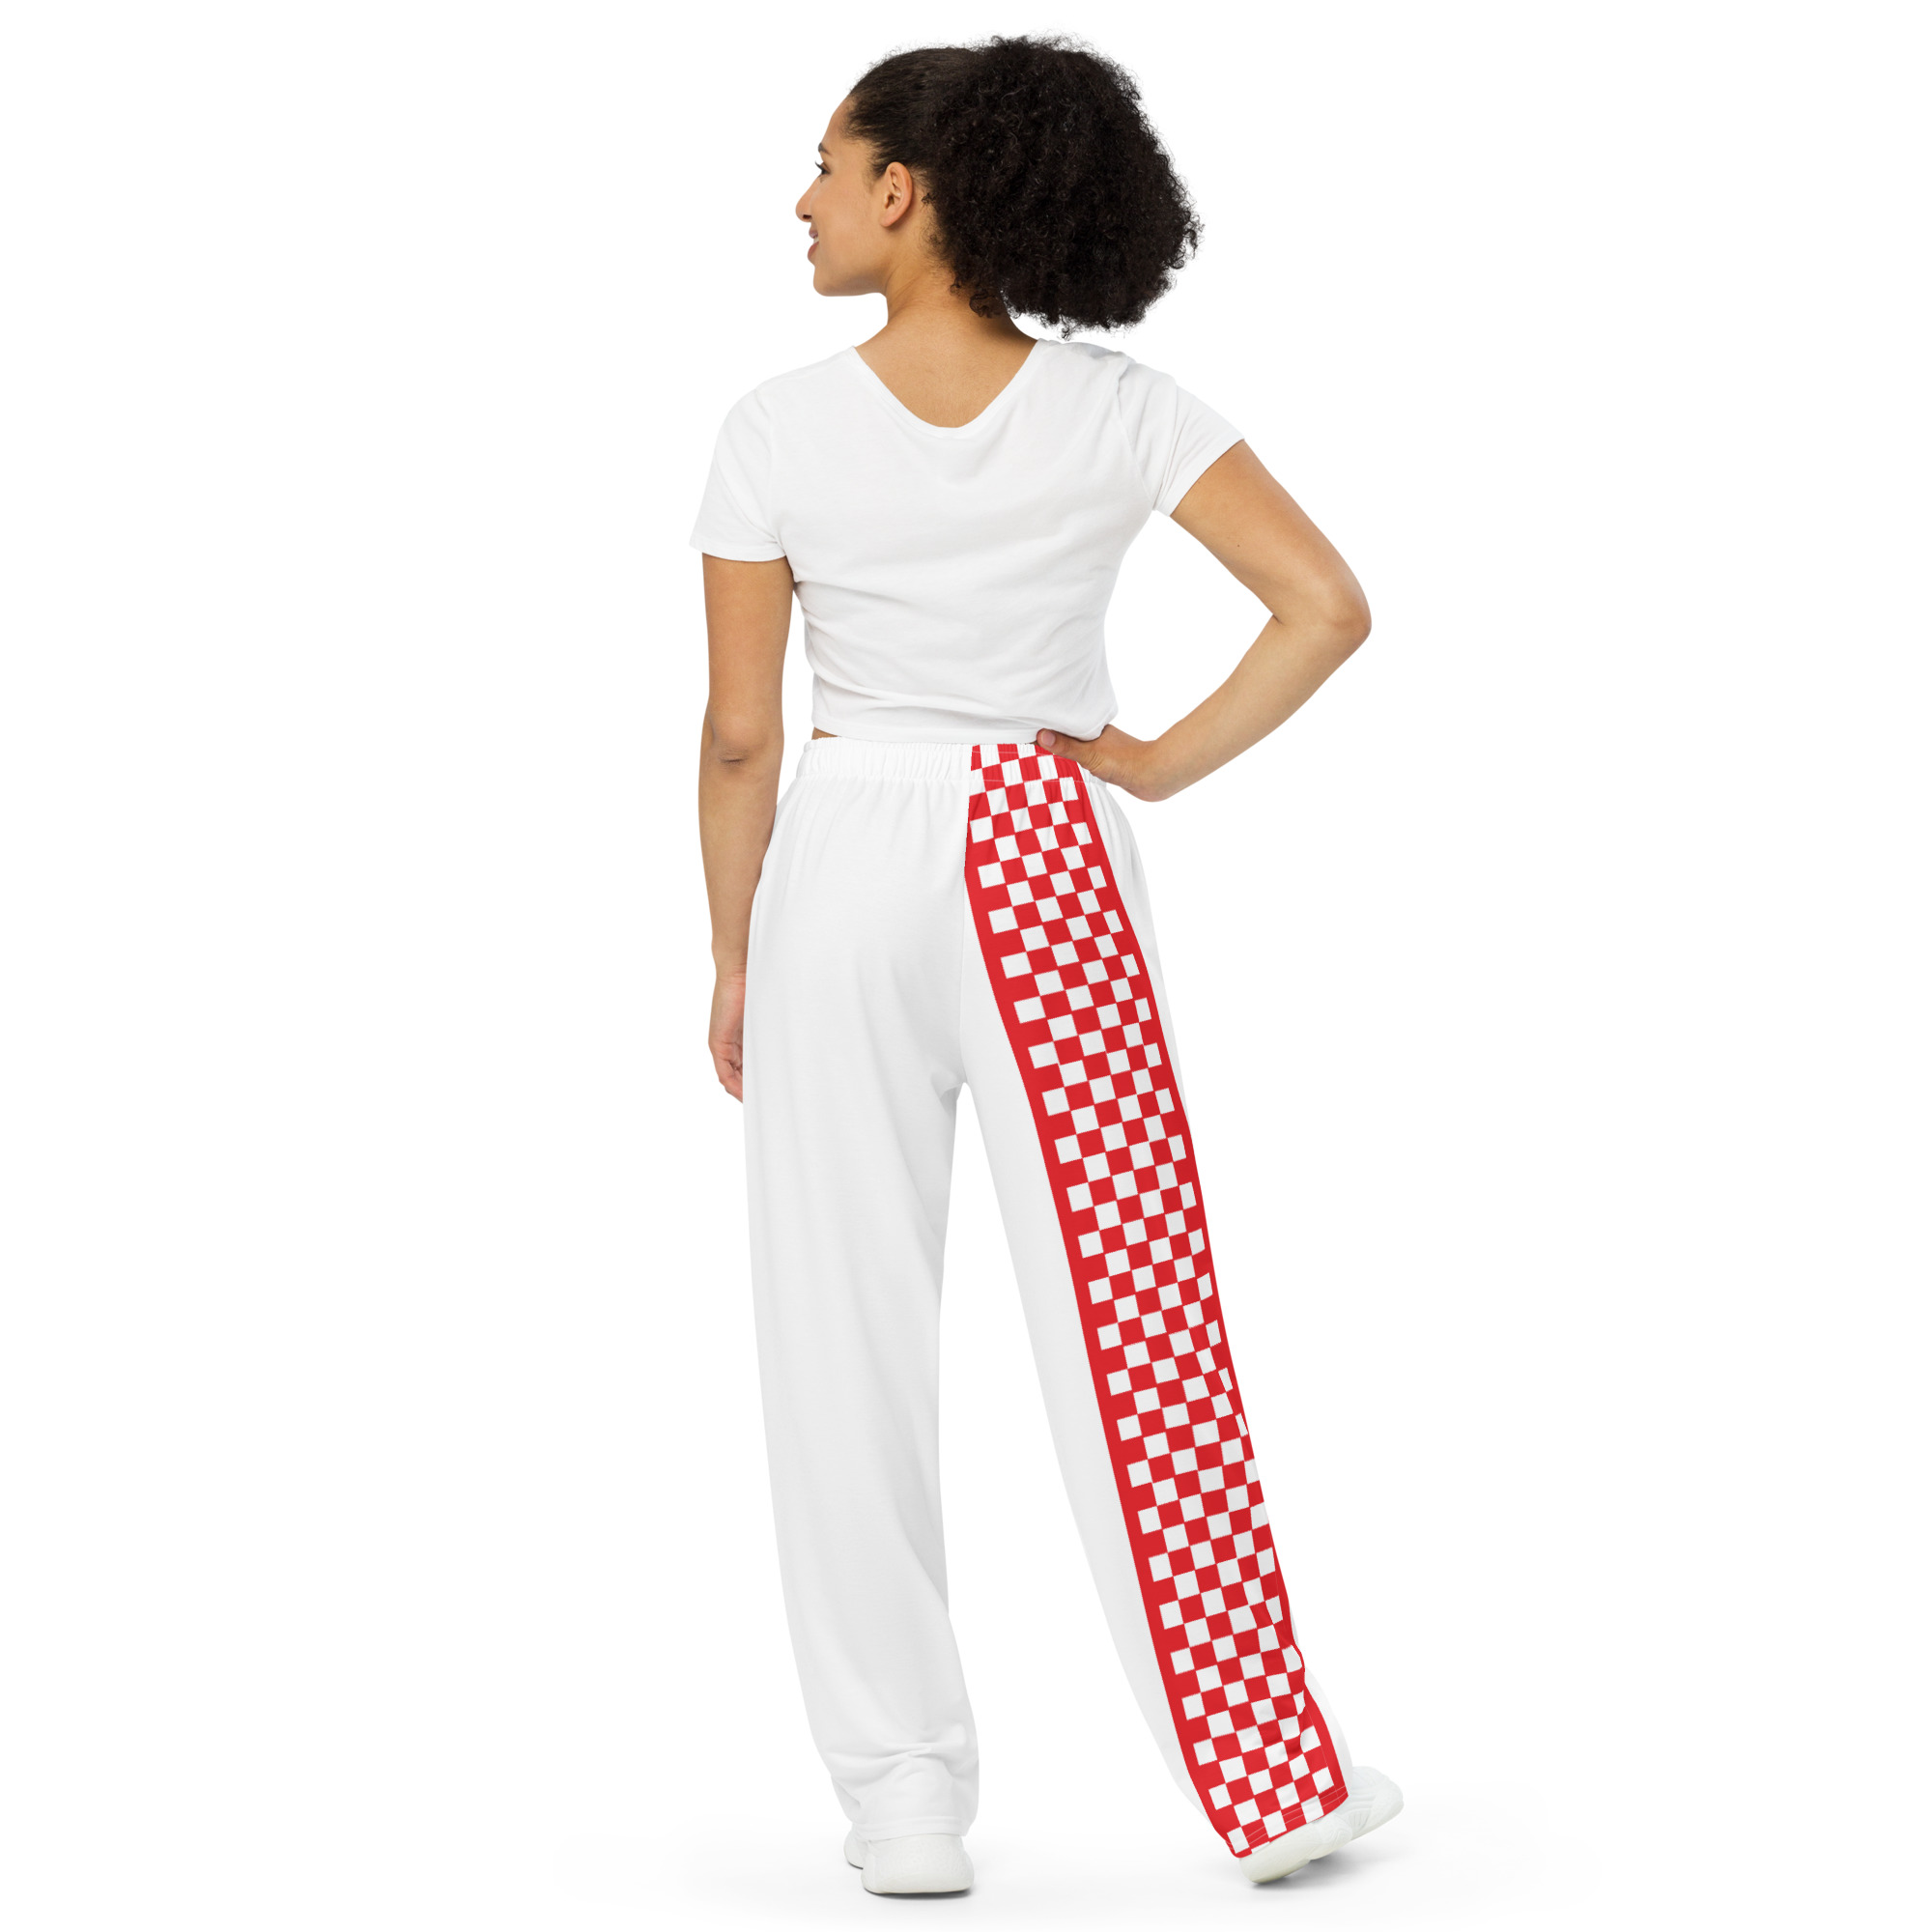 Shop my line of red and white checkered stripe LIBERO Volleyball Wide Leg Pajama Pants with deep pockets and drawstring by Volleybragswag on ETSY.